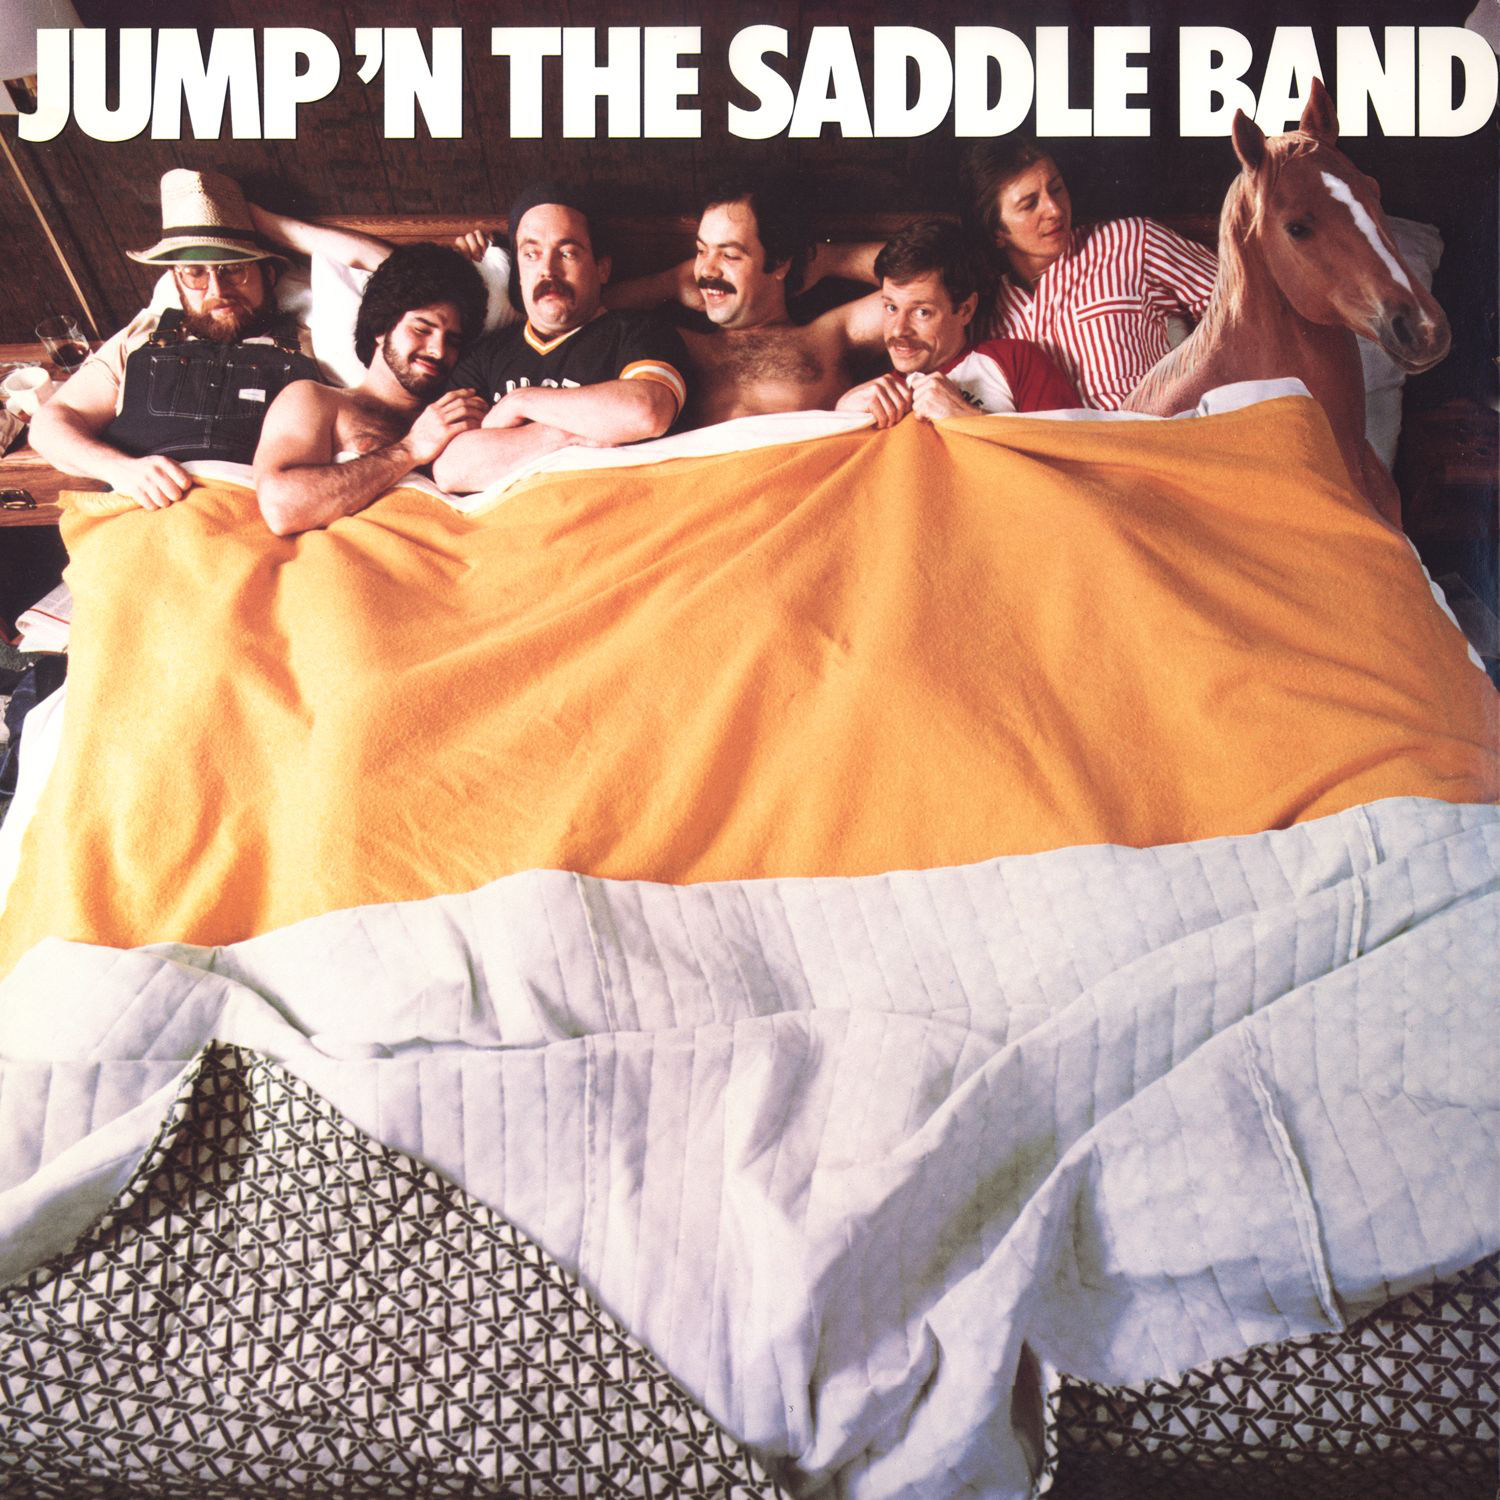 Art for The Curly Shuffle by Jump 'N the Saddle Band